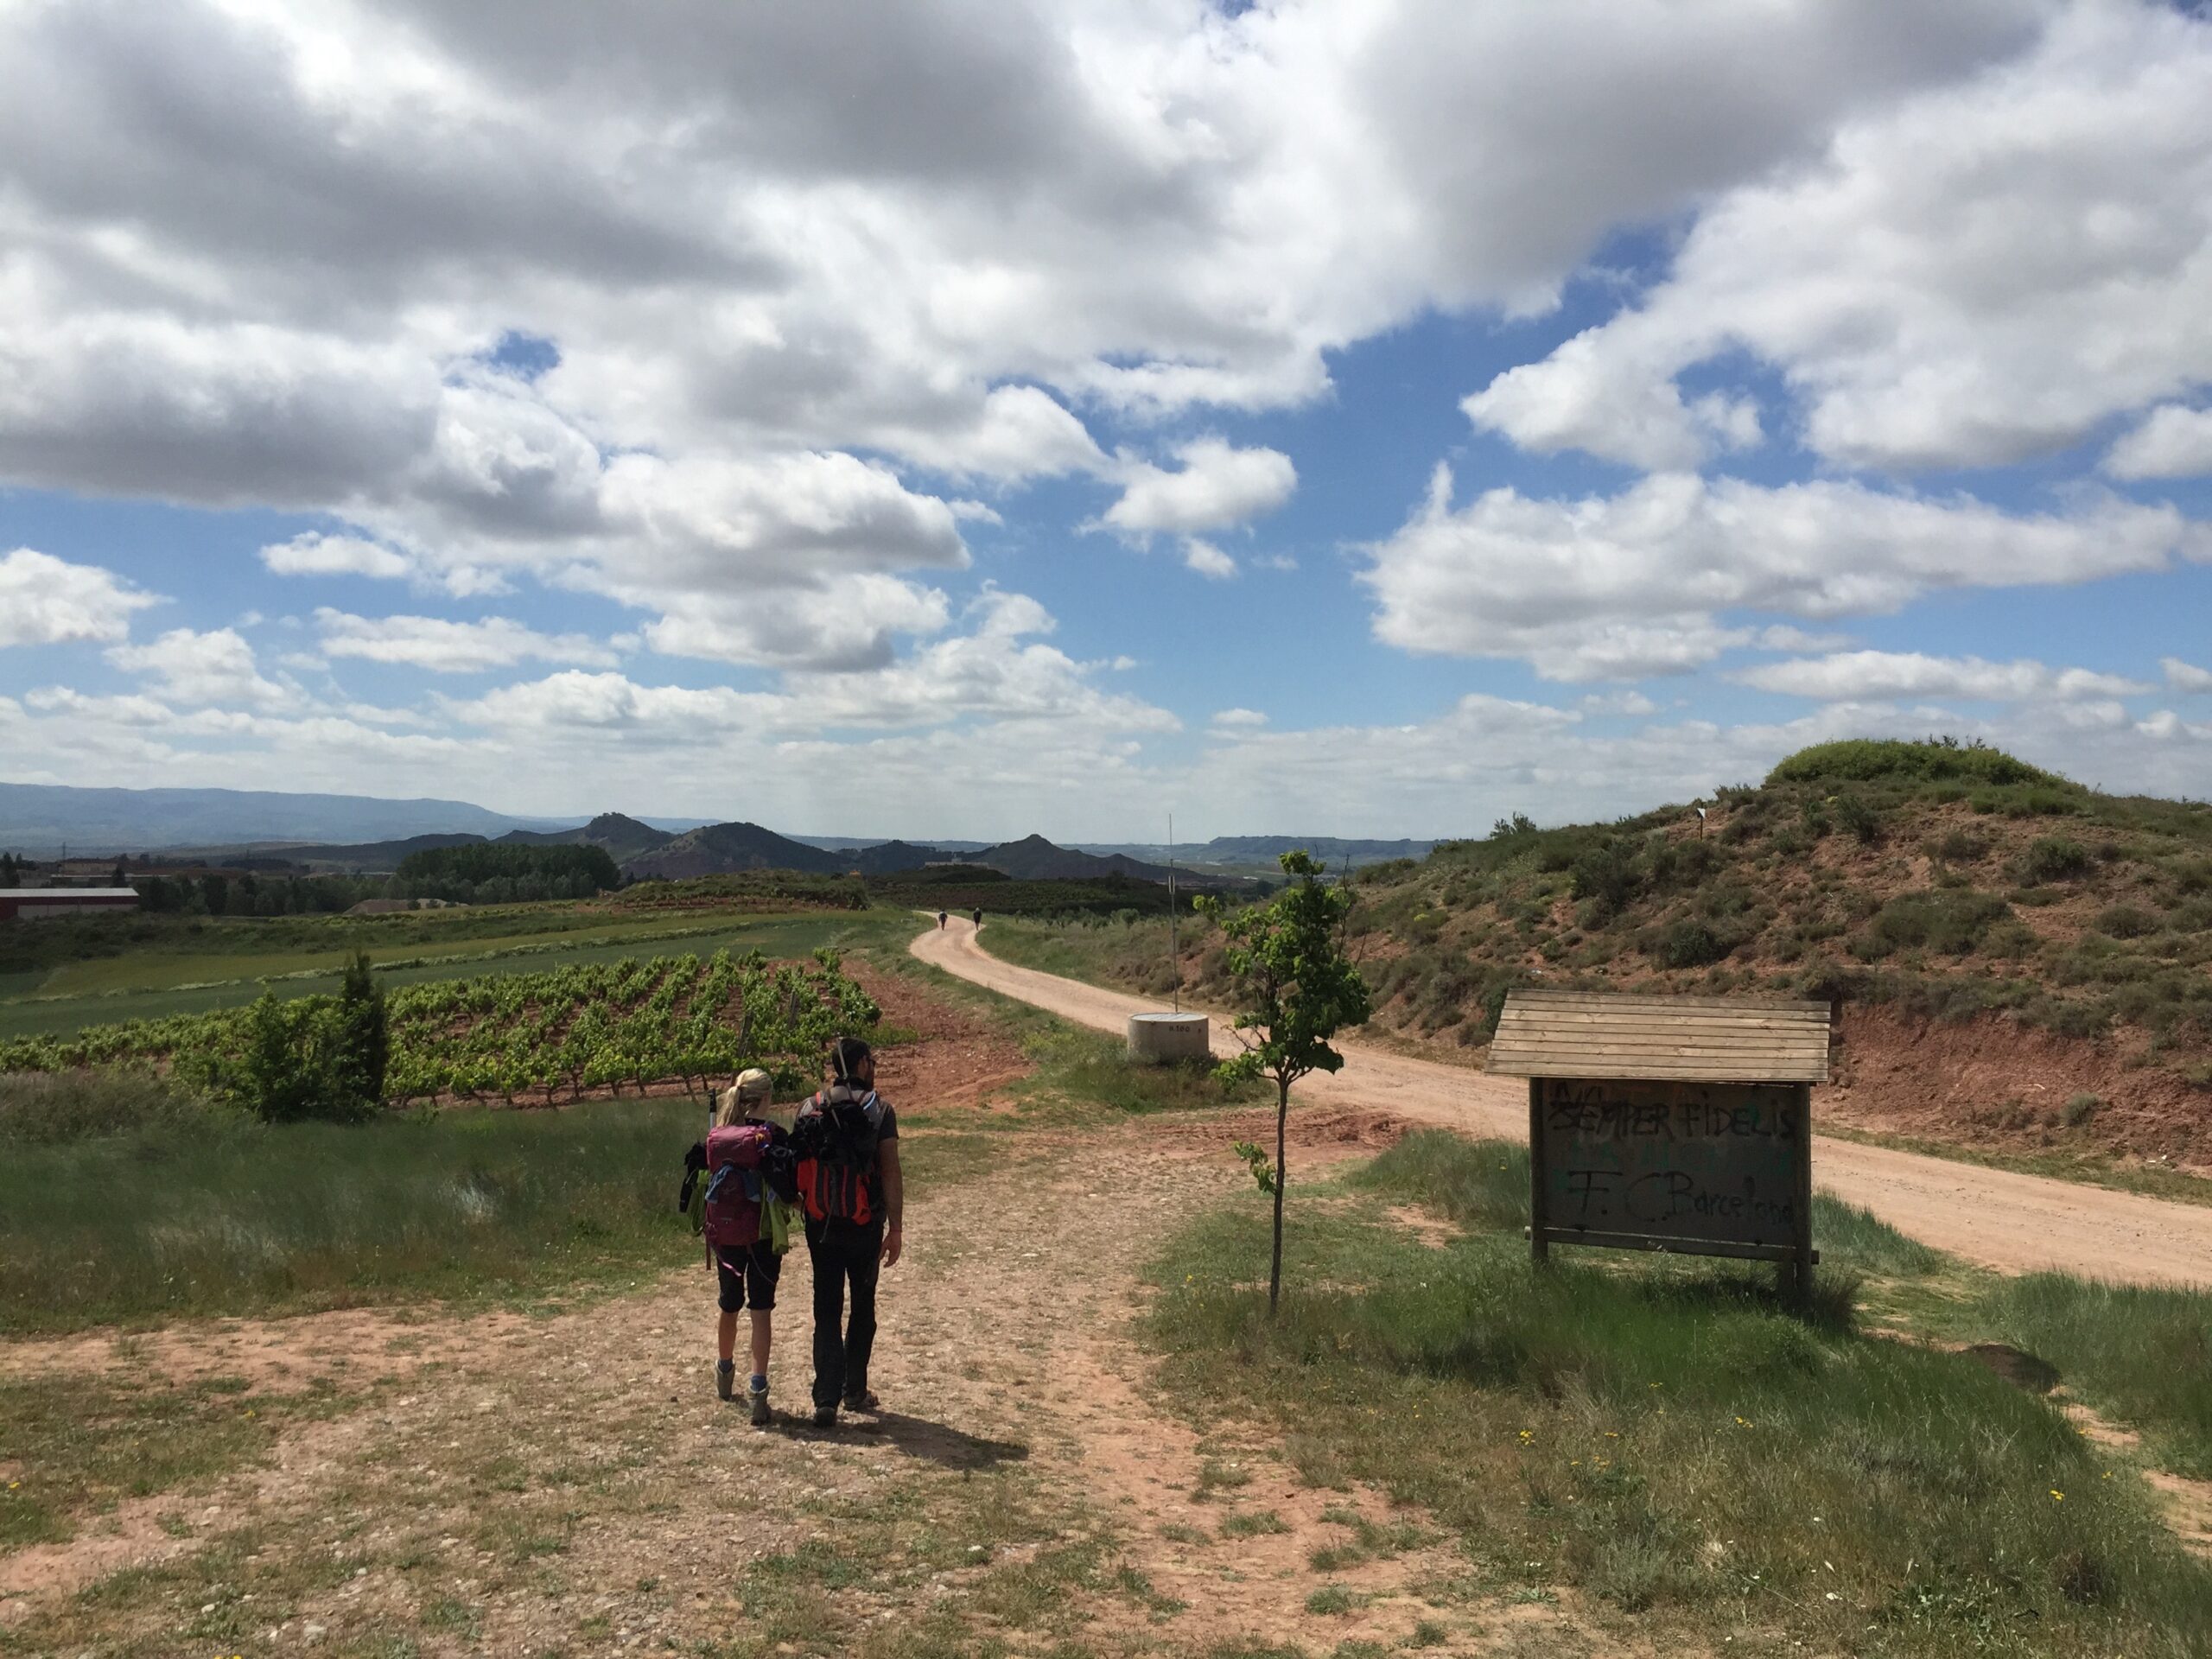 Hannah and Arnaud walk hand-in-hand on the way to N&aacute;jera, Spain on the Camino de Santiago.